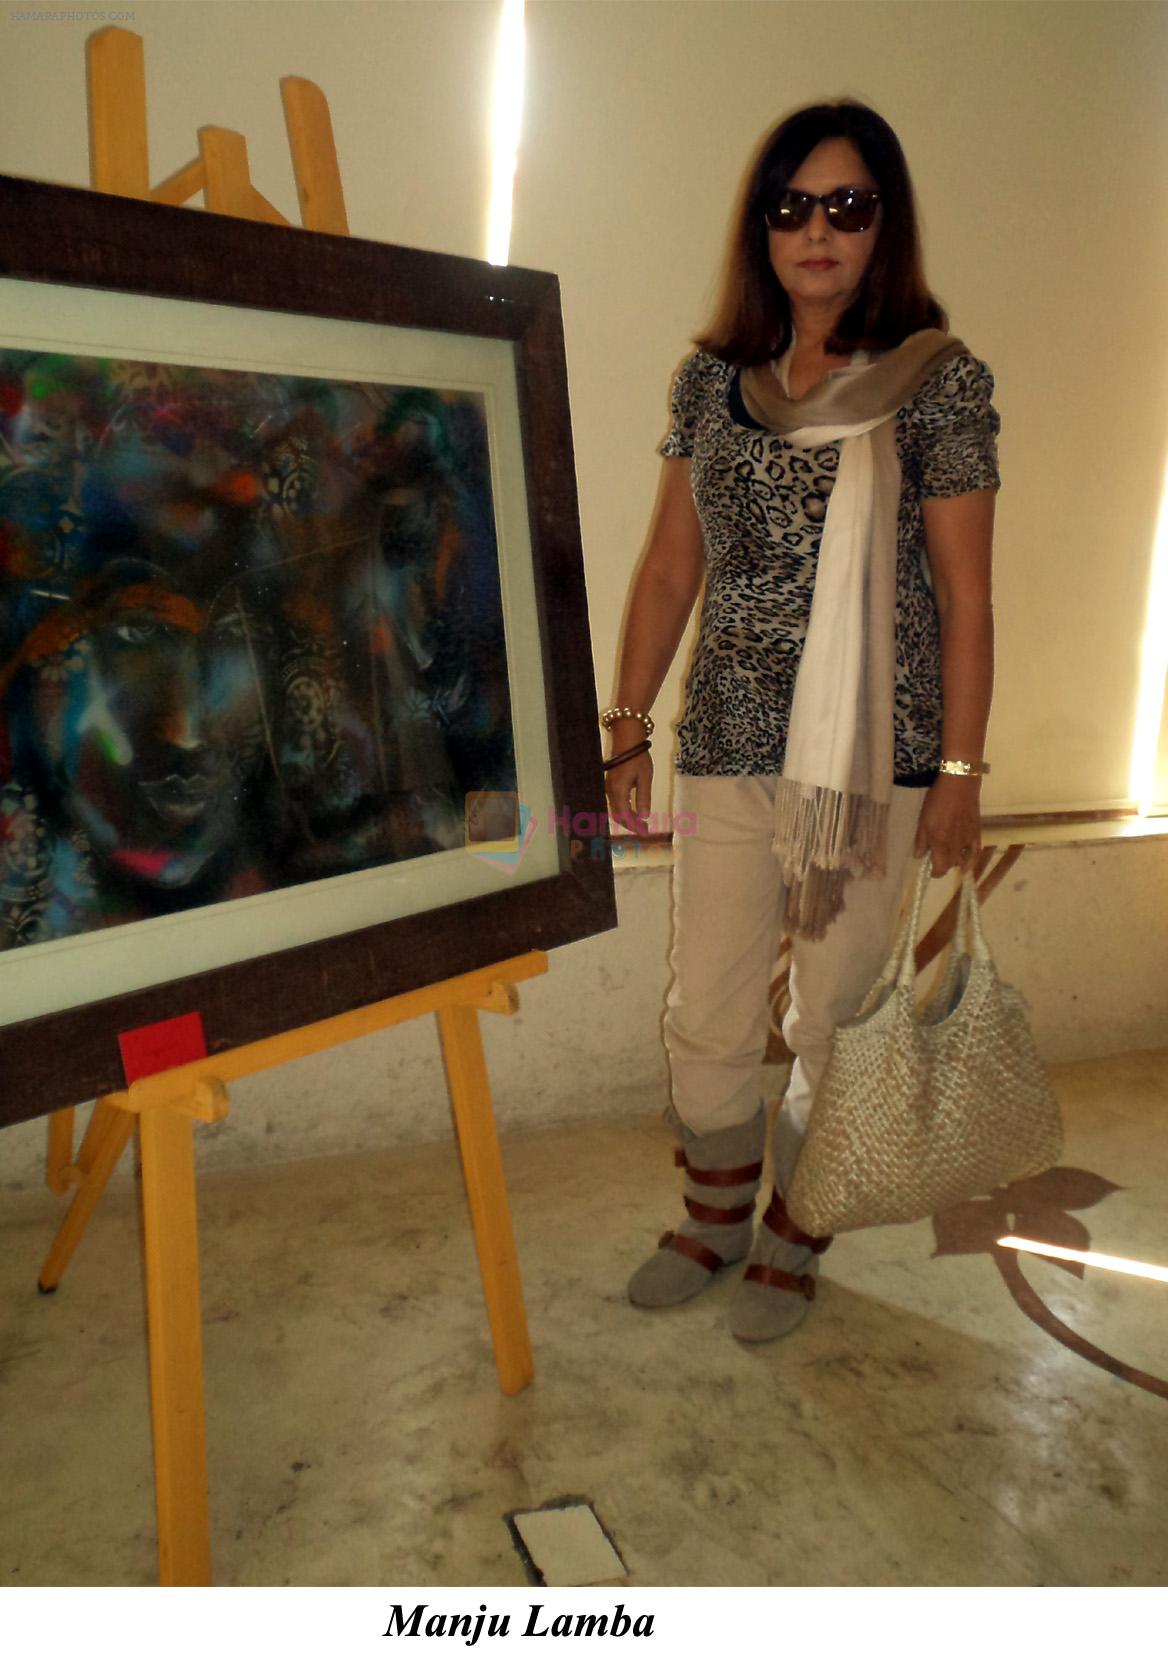 Manju Lamba at the Art and Fashion Brunch in The Wedding Cafe n Lounge on 22nd Jan 2012